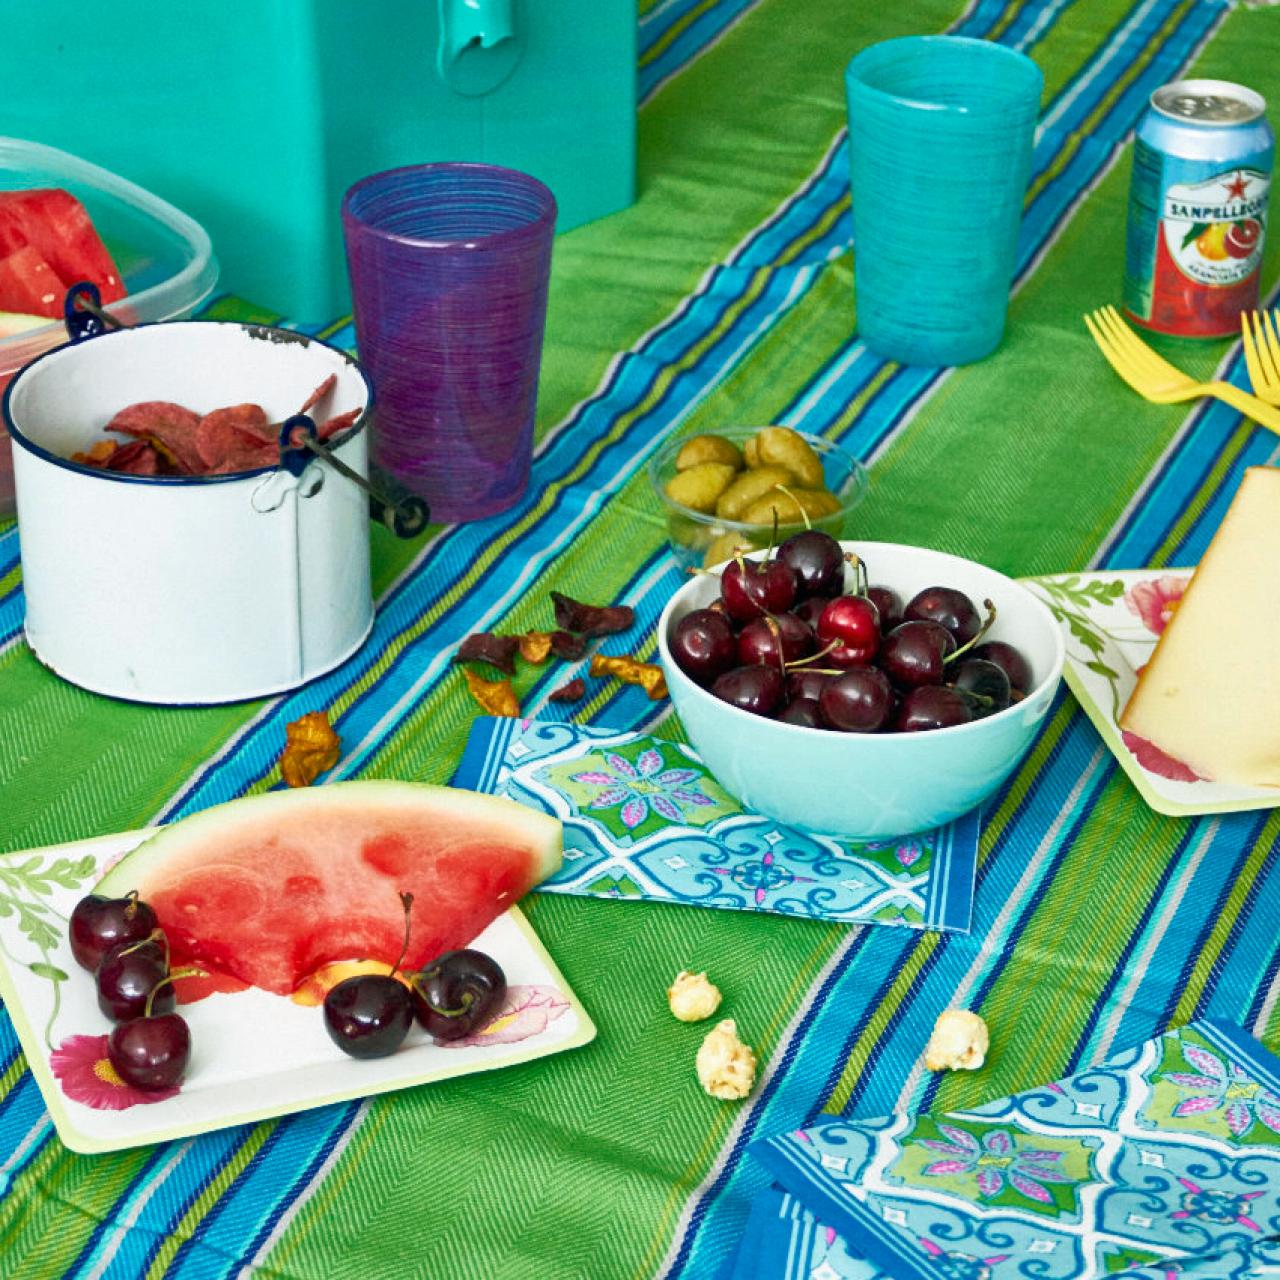 5 Easy Picnic Ideas for the Perfect Summer Day!